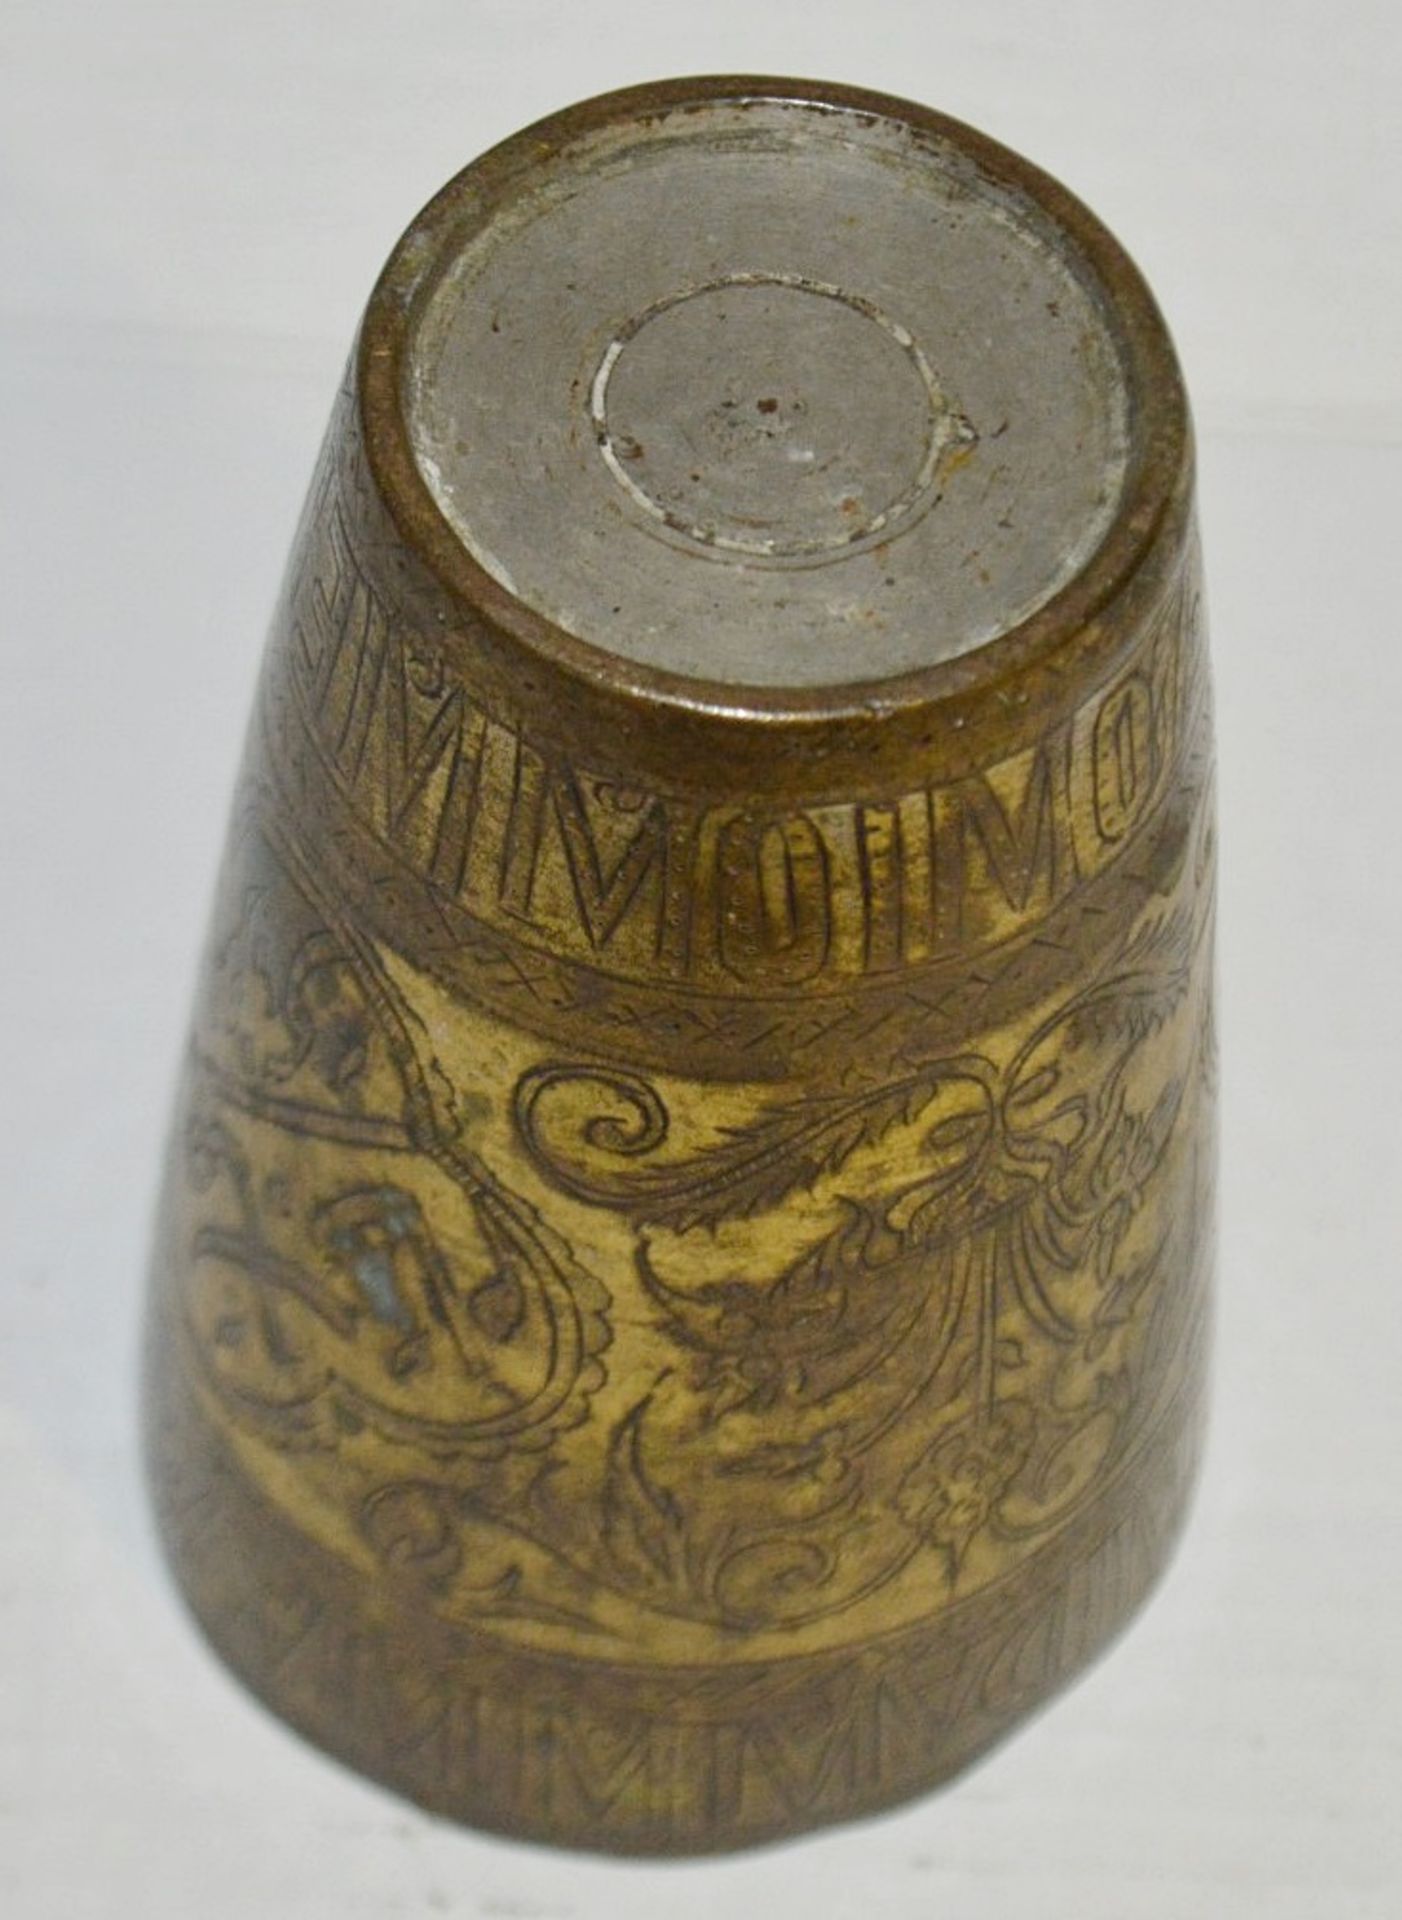 1 x Persian Gilded Tinner Beaker - Decorated With Floral Design And Scripture - Height: 14.5cm (5. - Image 4 of 6